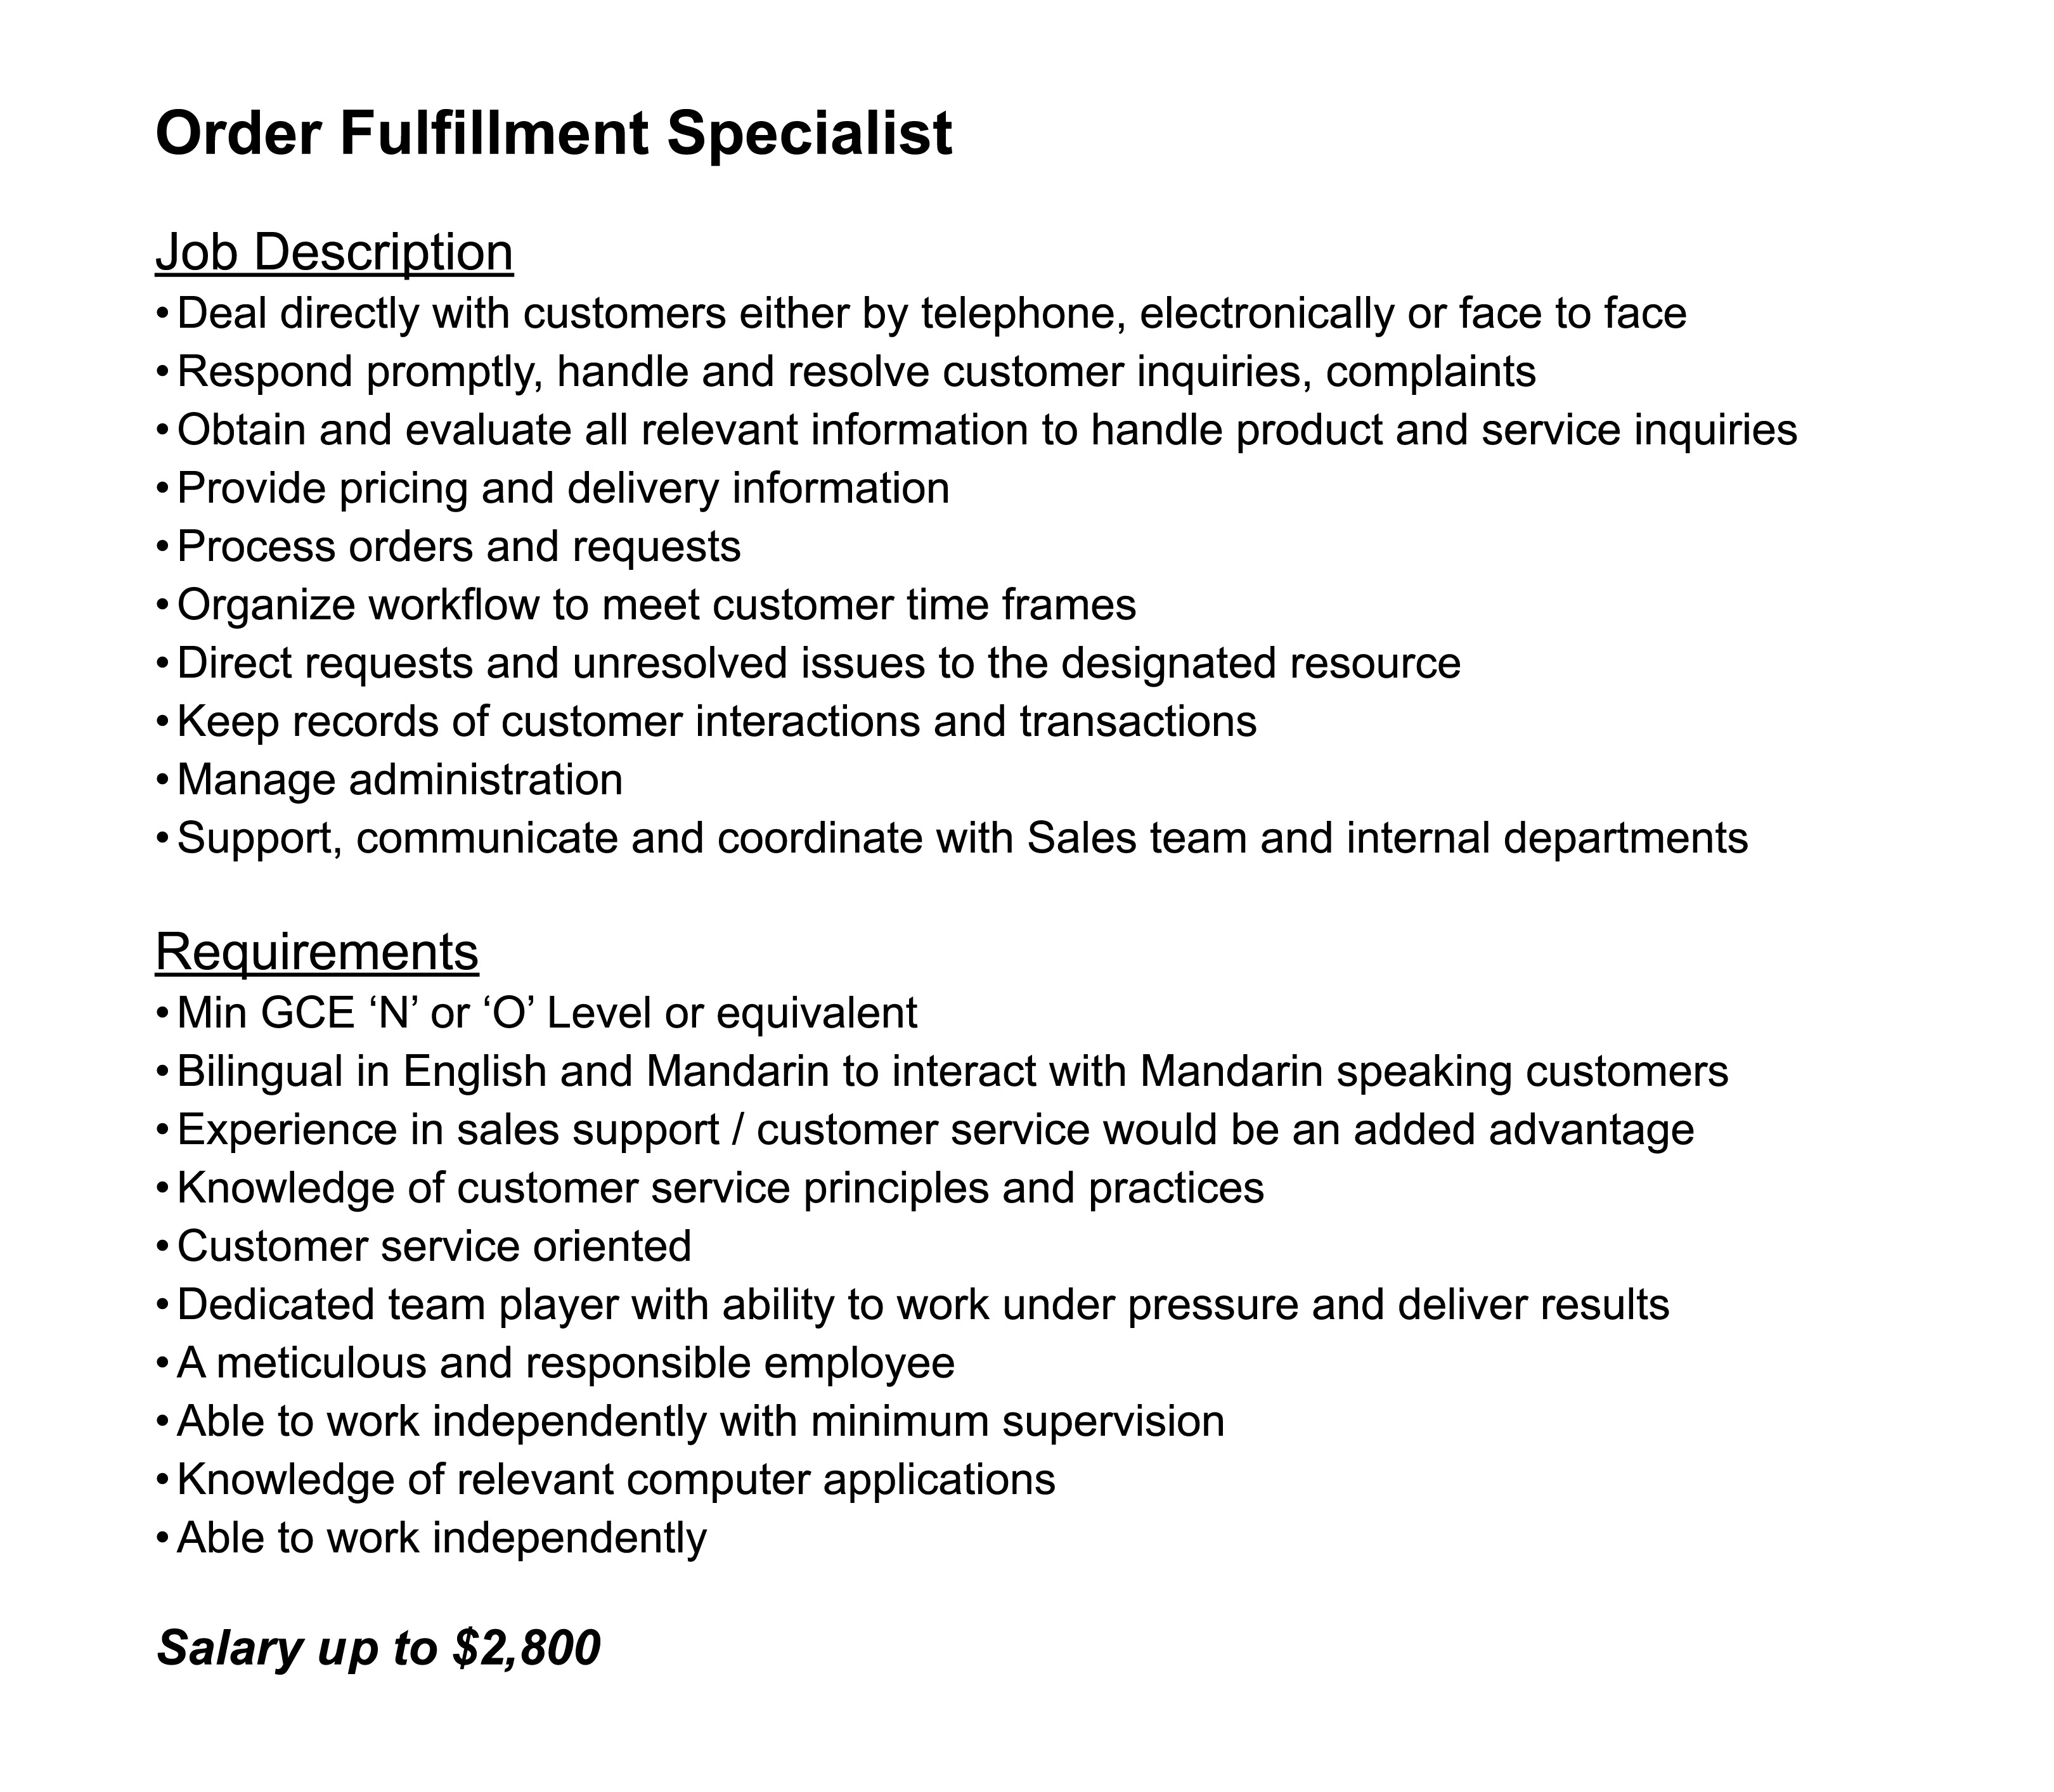 Recruitments_YMS_Order Fulfillment Specialist